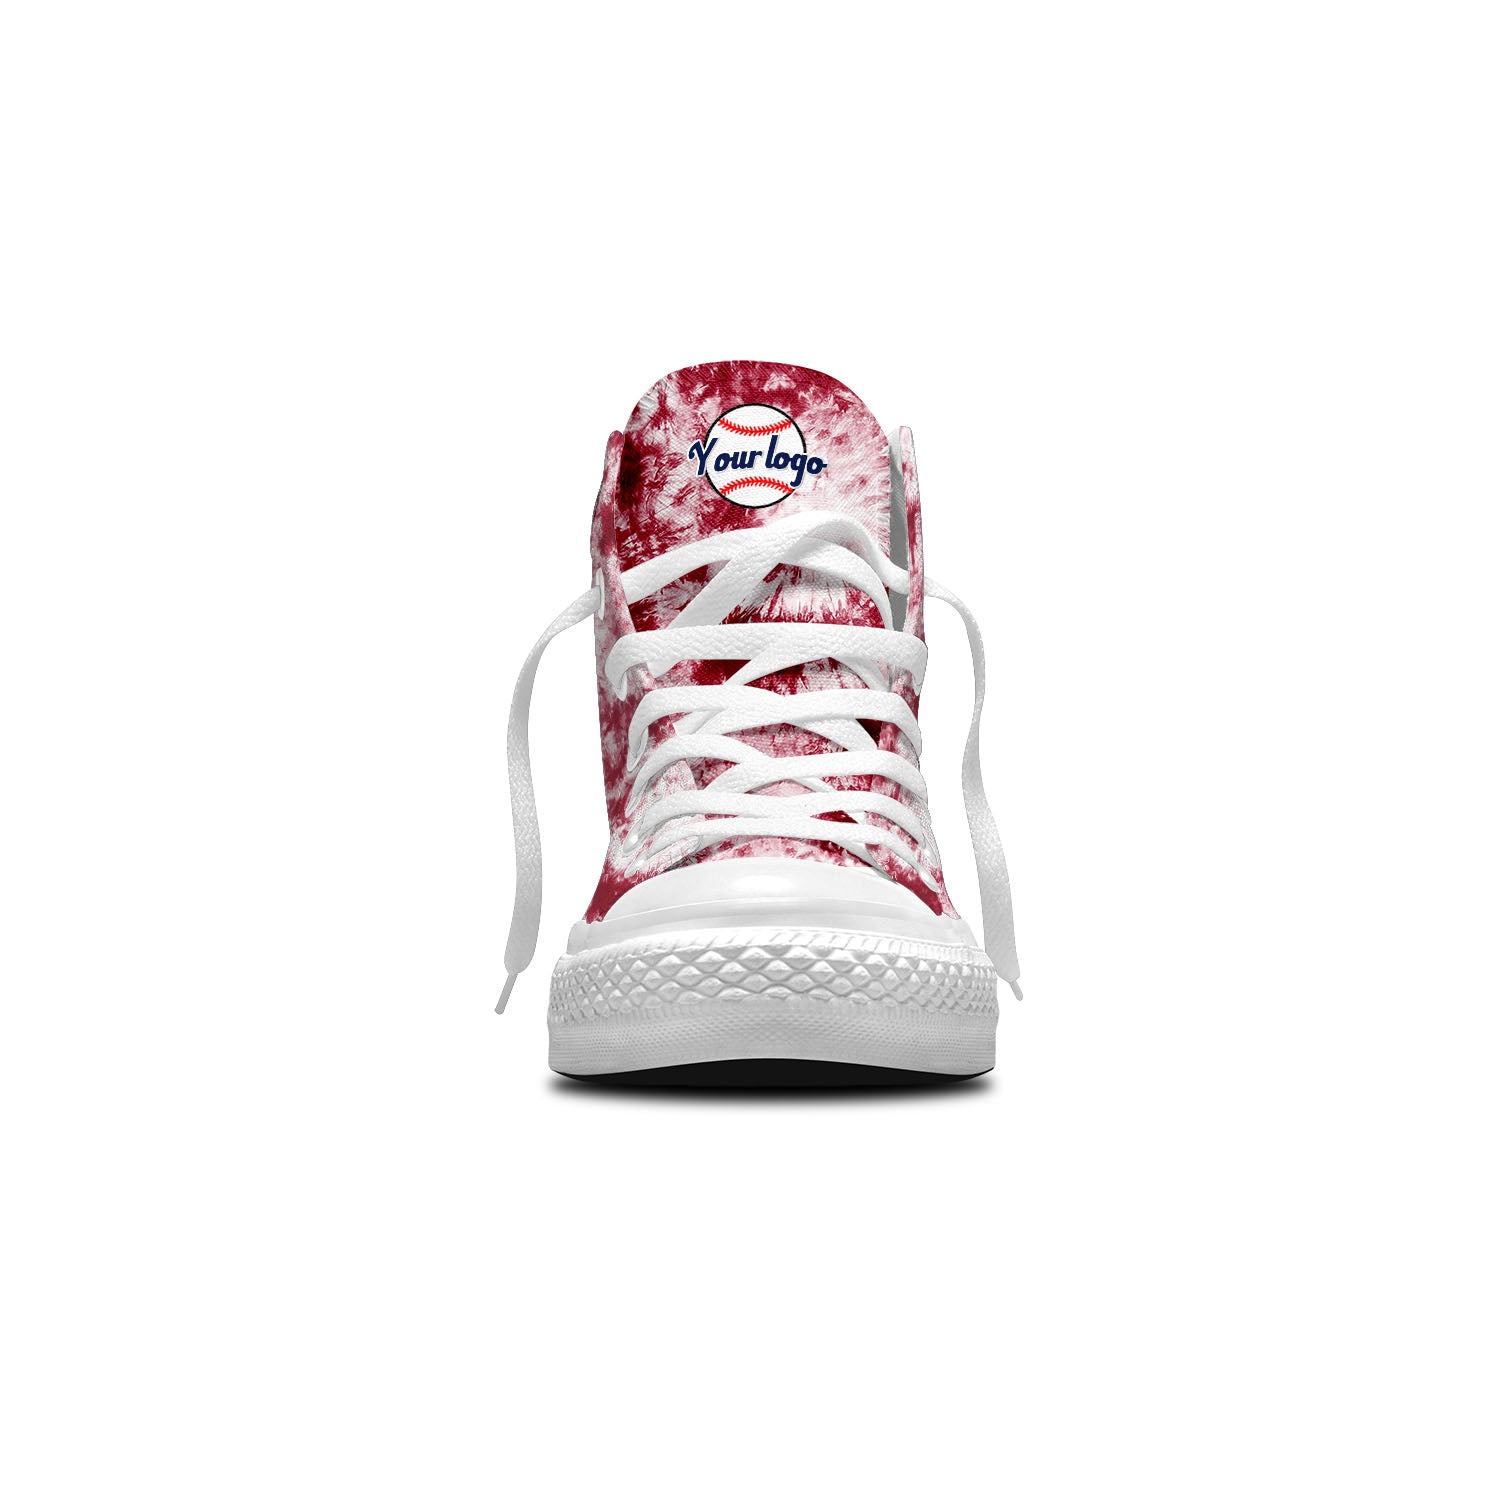 custom high top baseball canvas shoes white-red